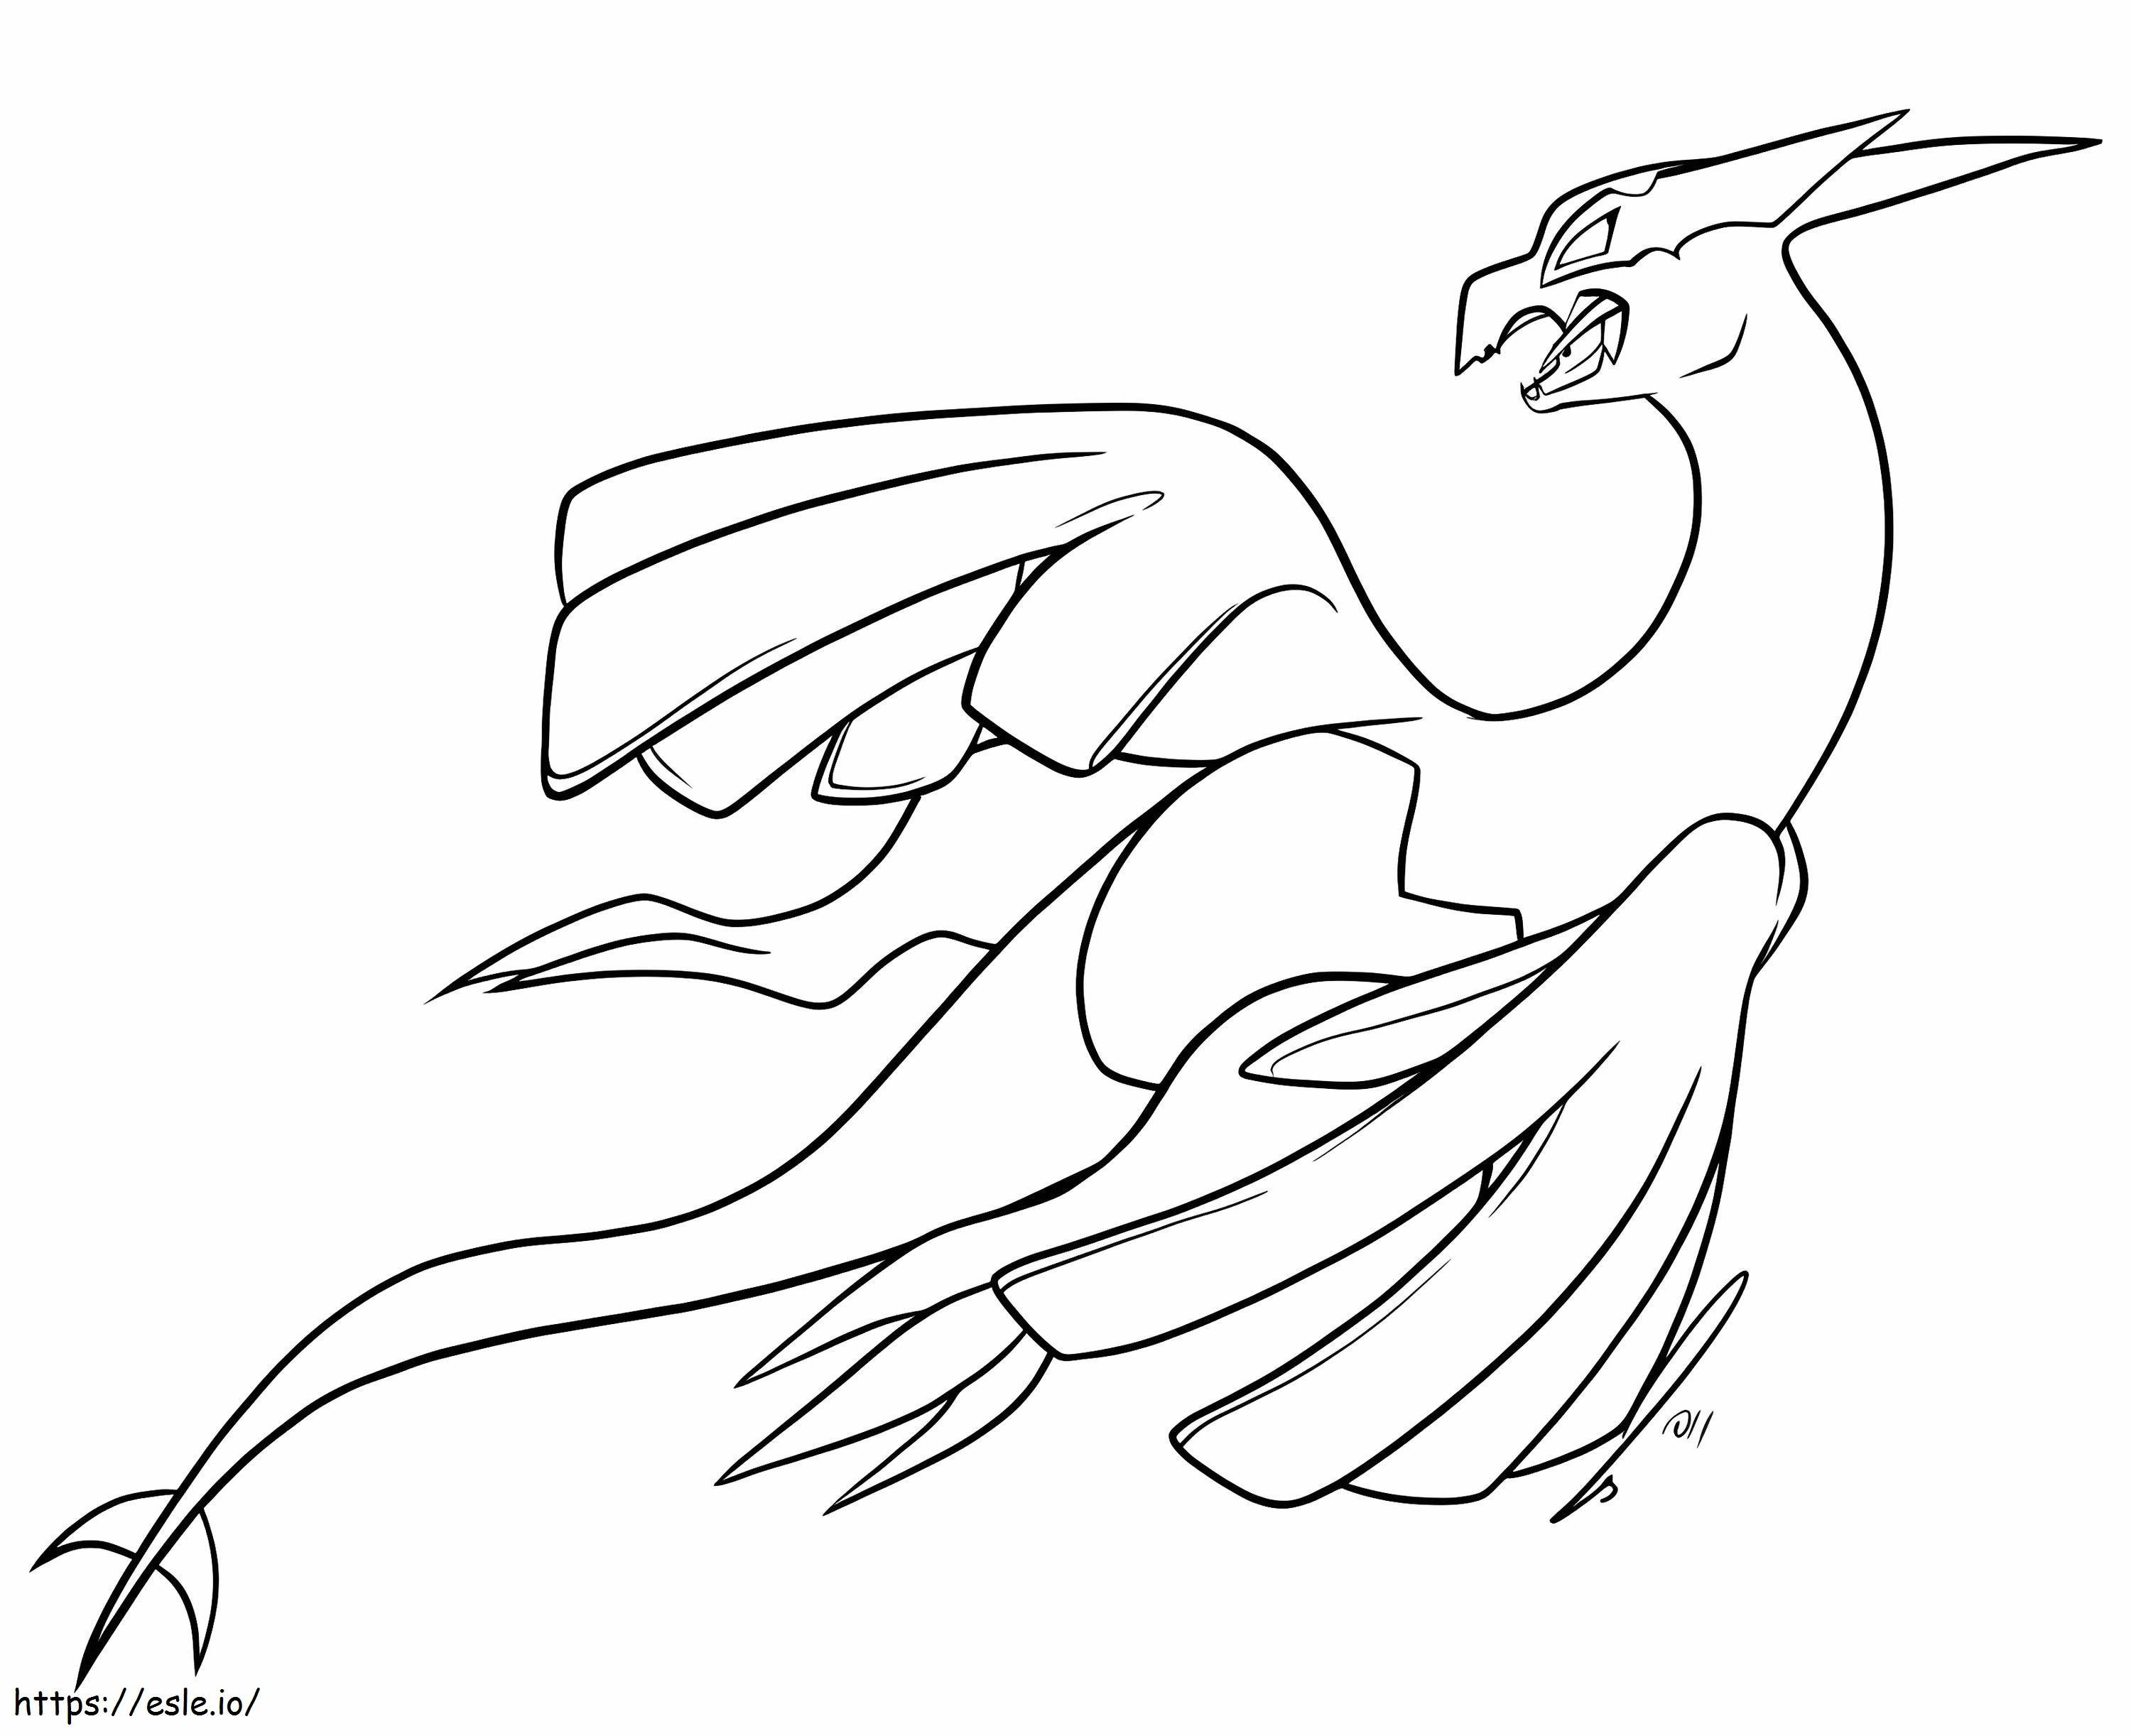 Angry Lugia coloring page